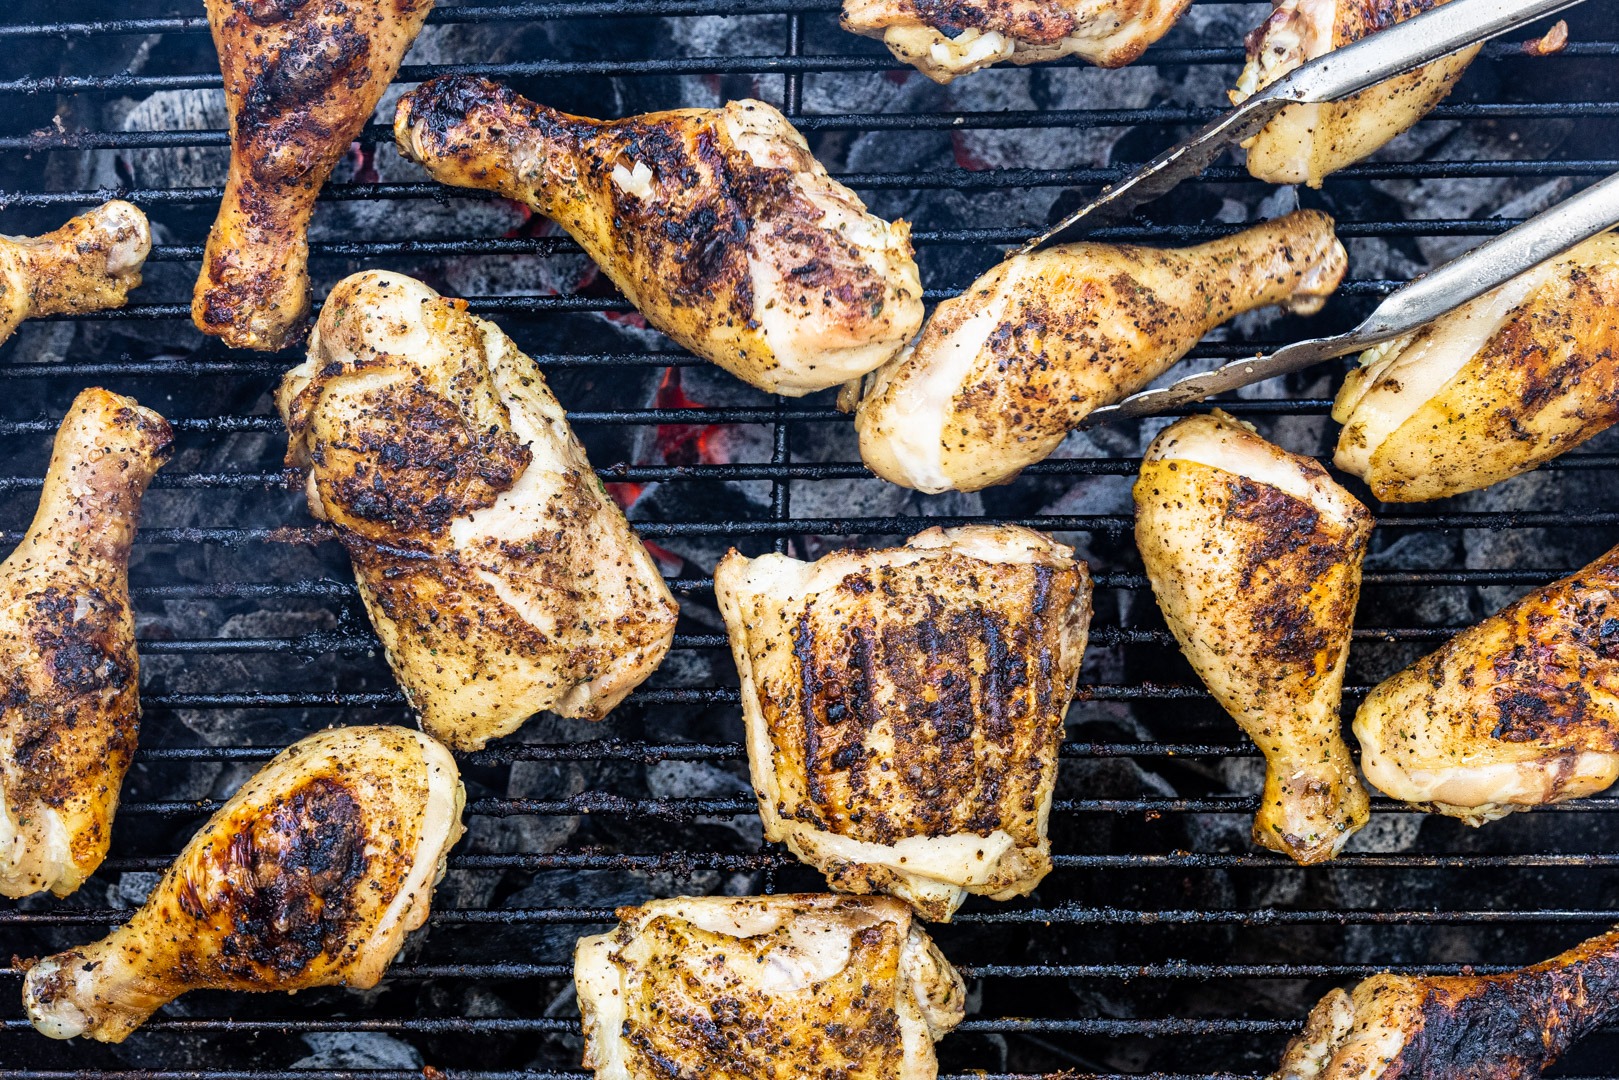 A grill full of chicken